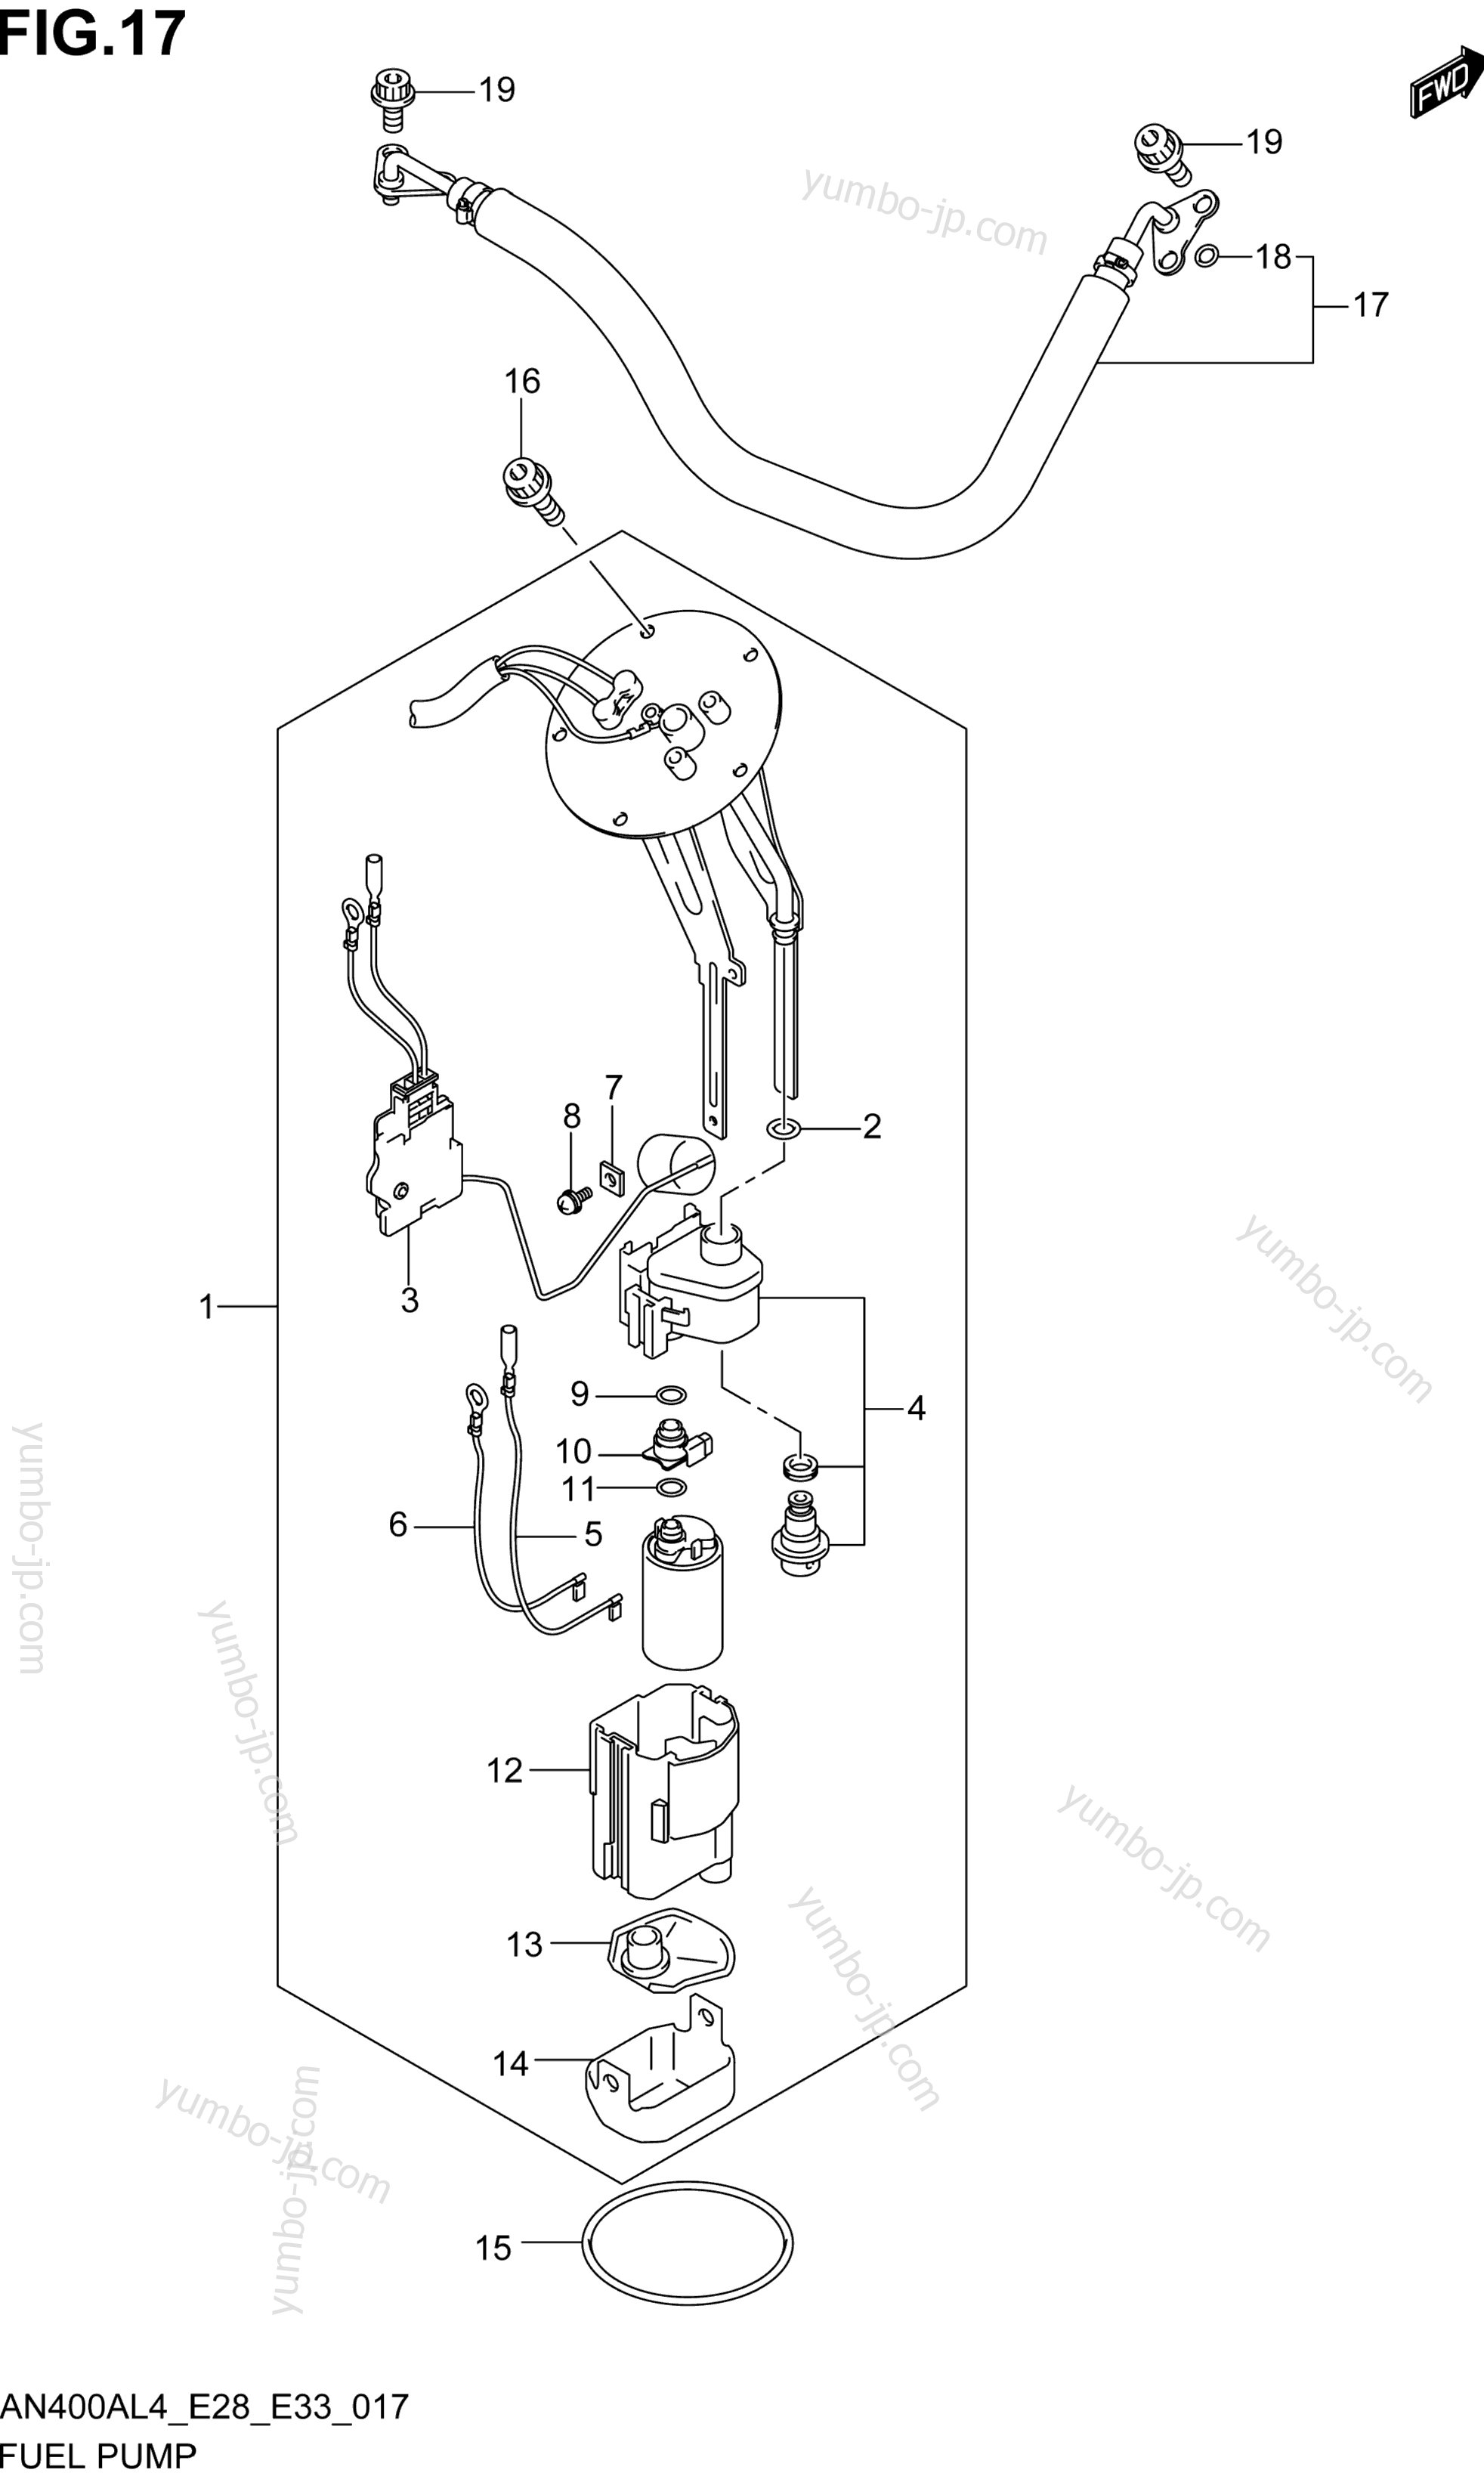 FUEL PUMP for scooters SUZUKI AN400A 2014 year